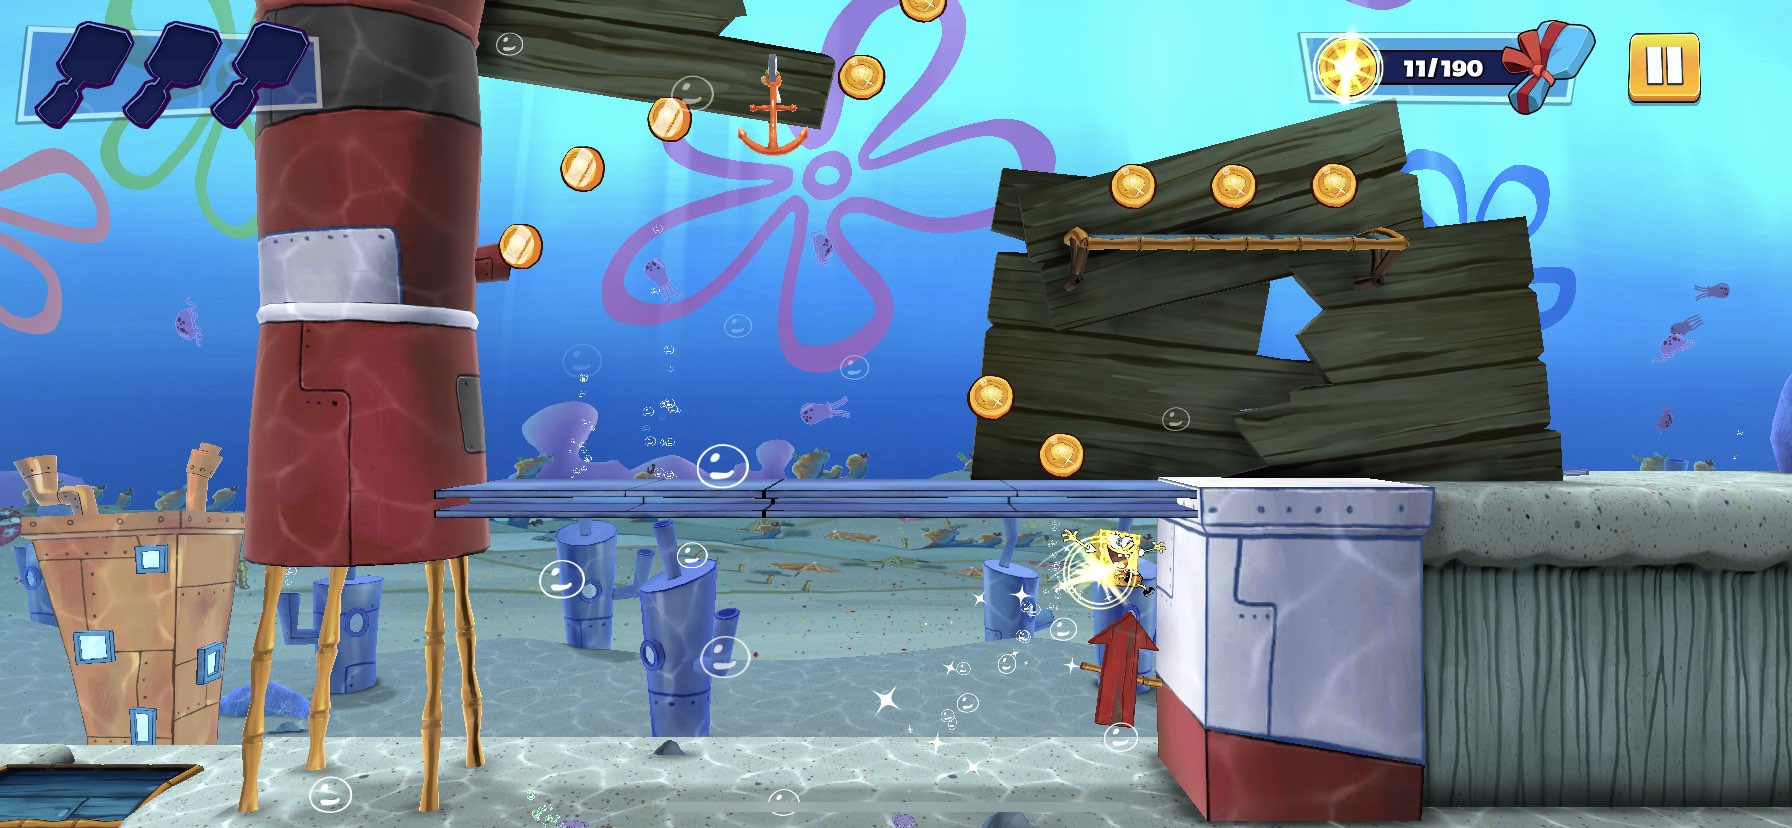 Spongebob Patty Pursuit From Nickelodeon Launches On Apple Arcade